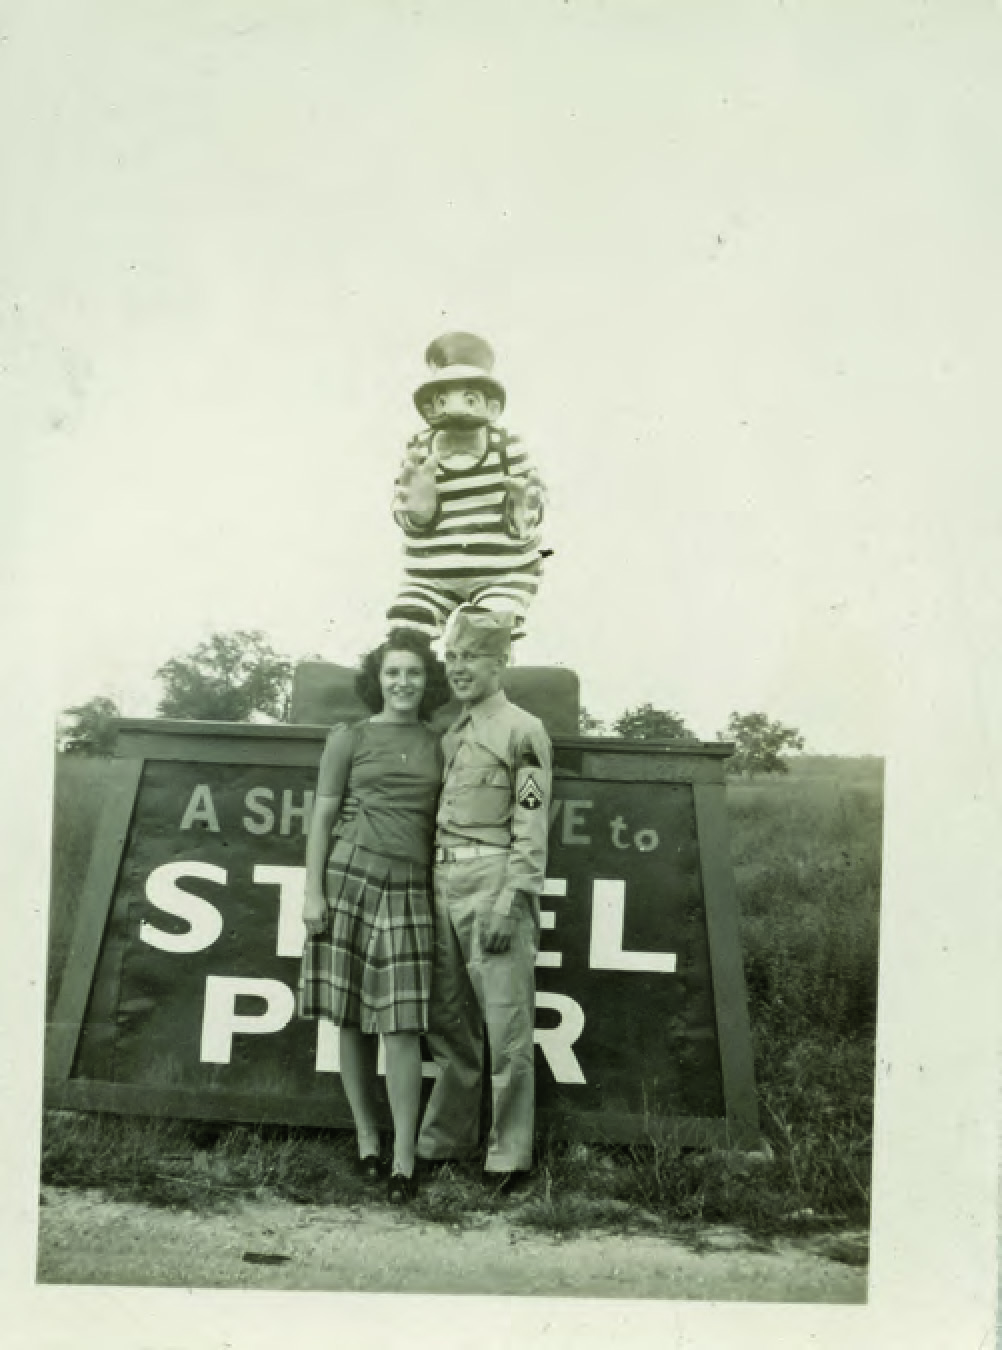 A couple standing in front of a promotional Atlantic City Steel Pier sign/statue